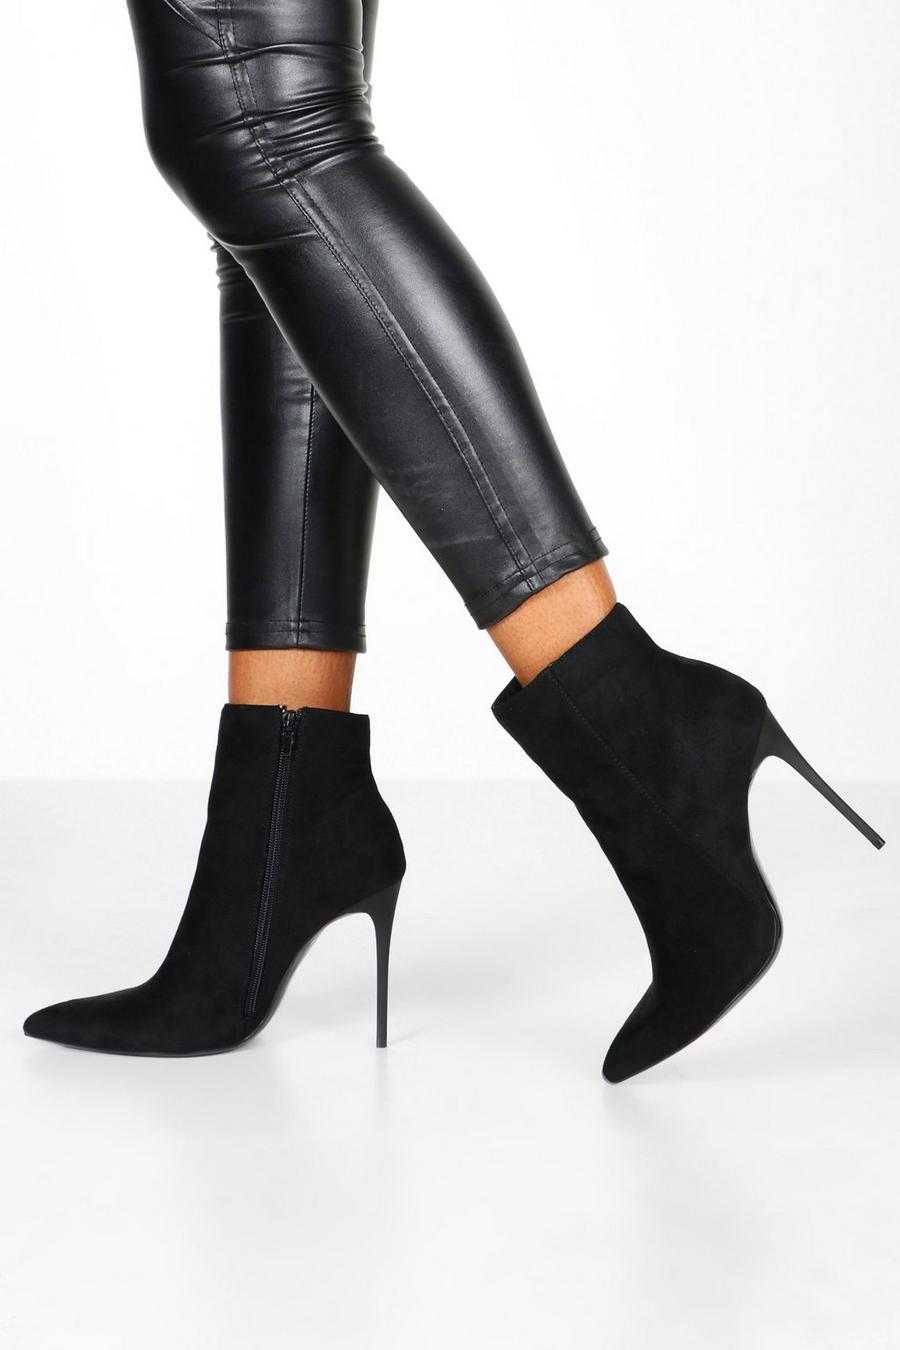 Black Stiletto Heel Pointed Toe Ankle Boots image number 1